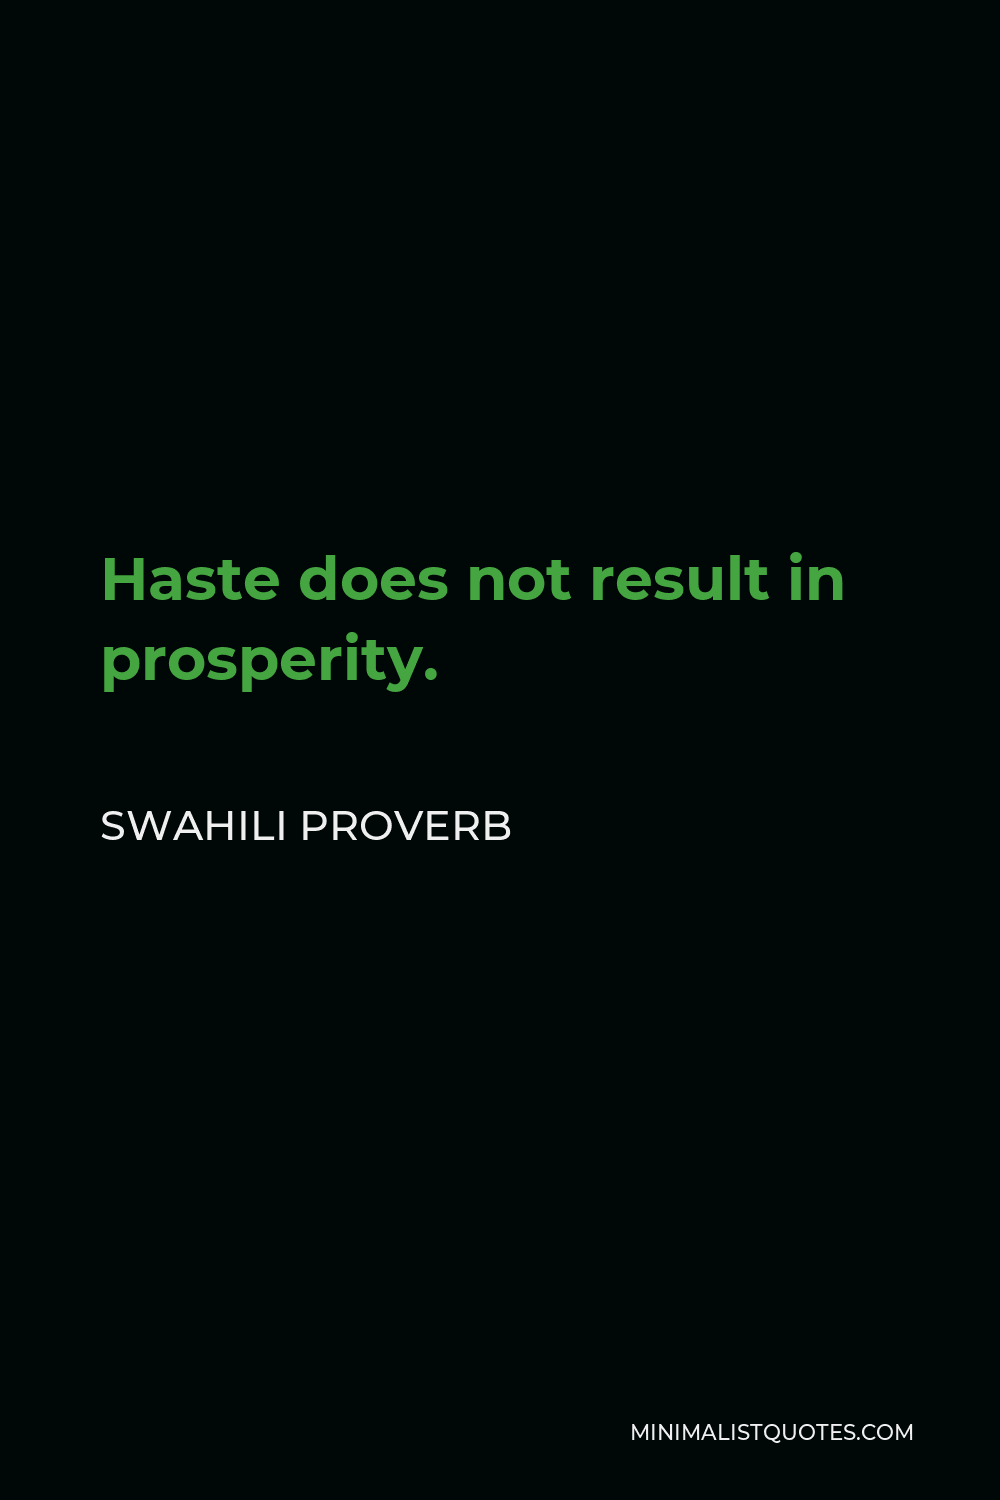 Swahili Proverb Quote - Haste does not result in prosperity.